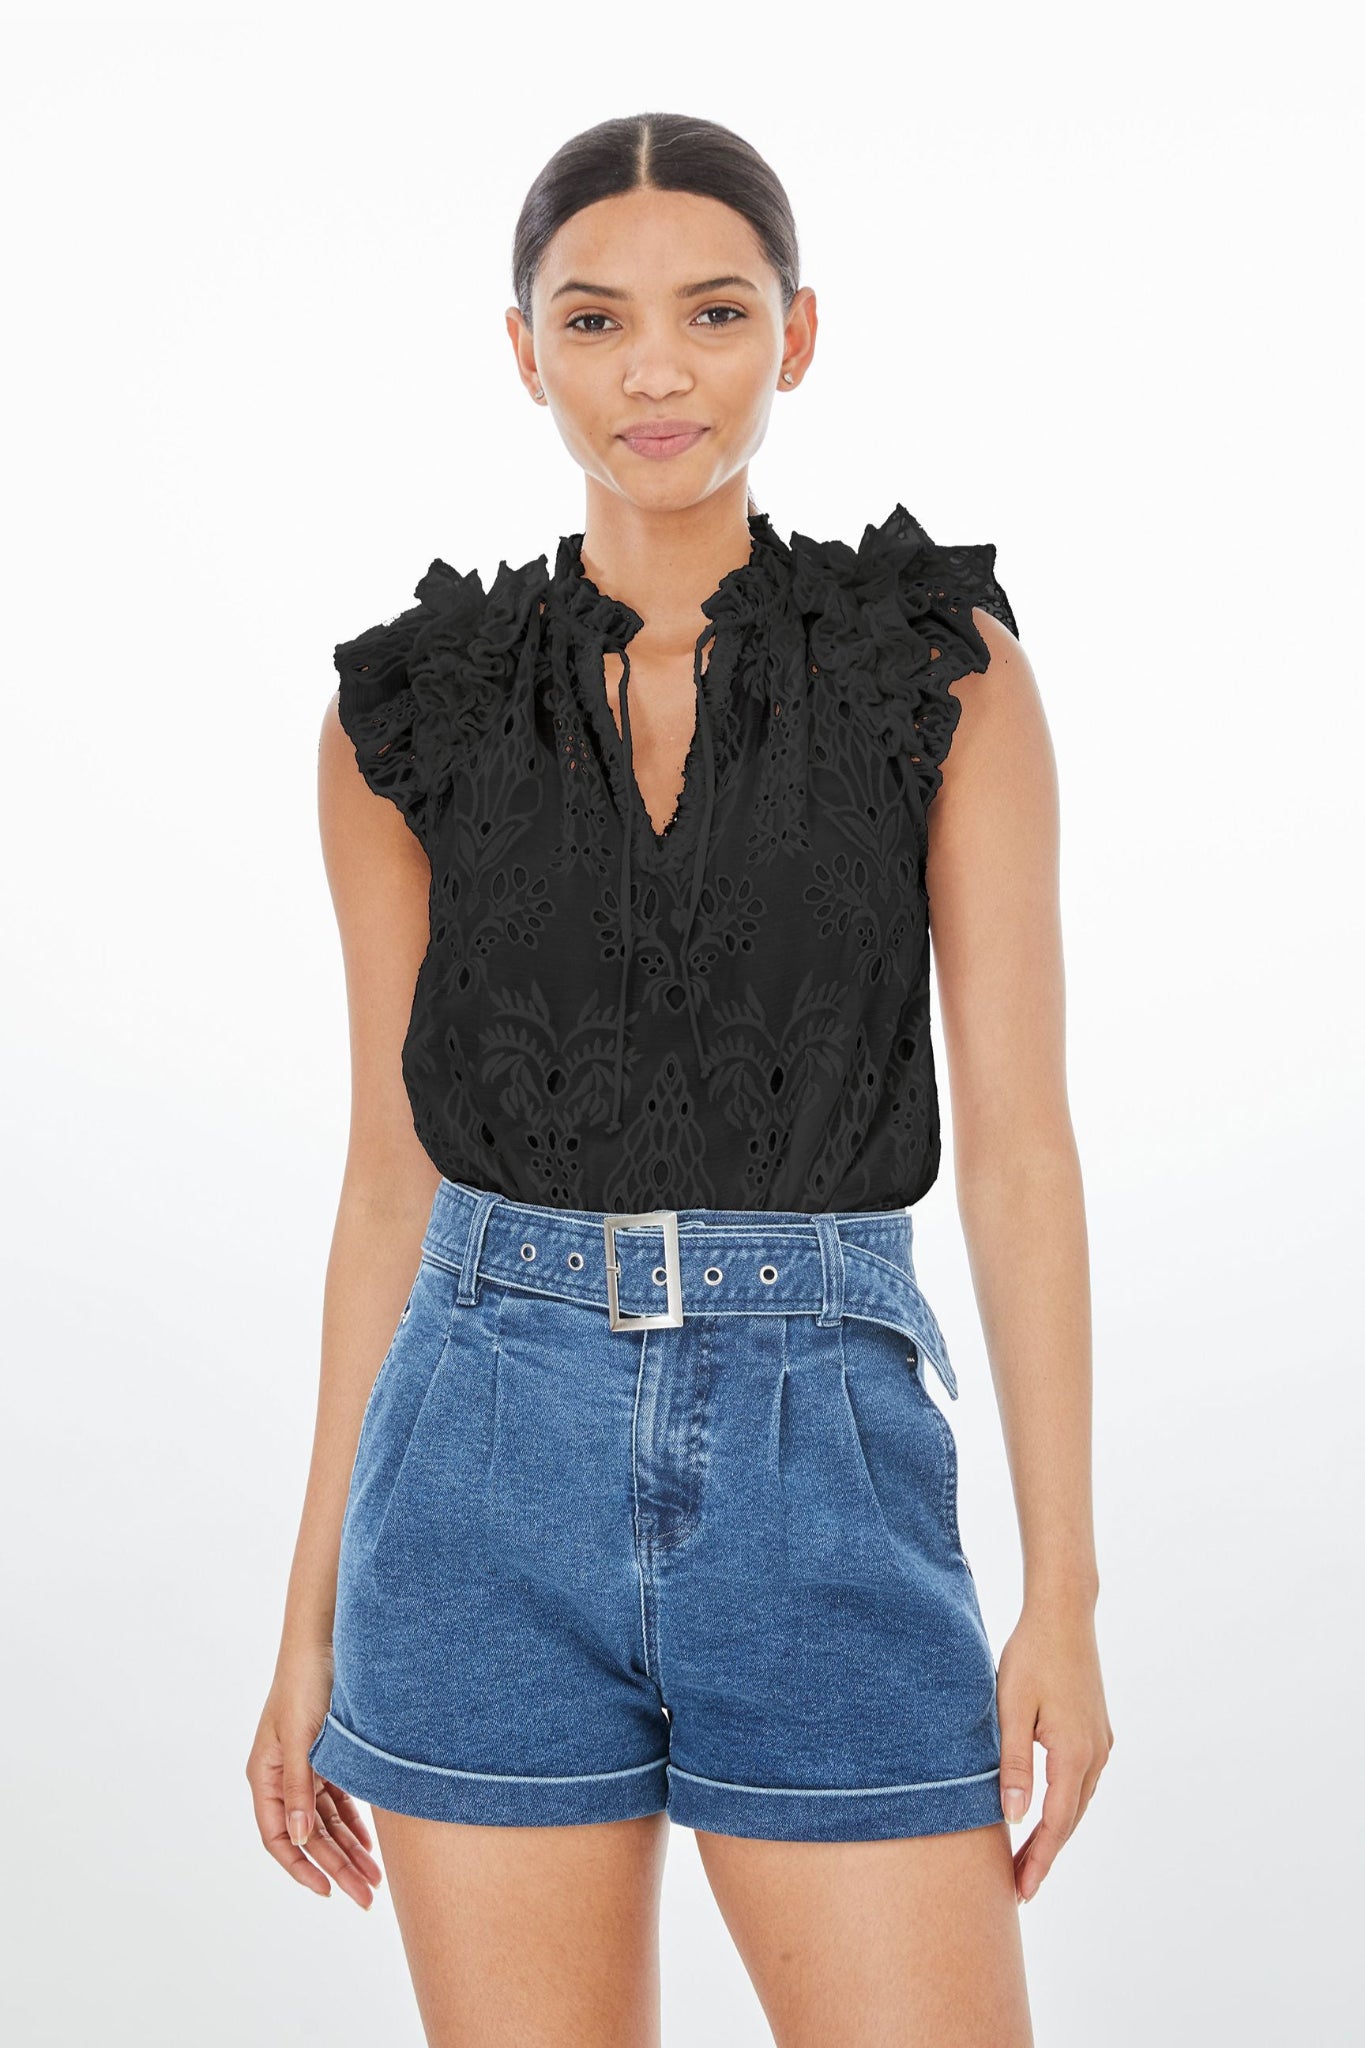 Joy Embroidered Top